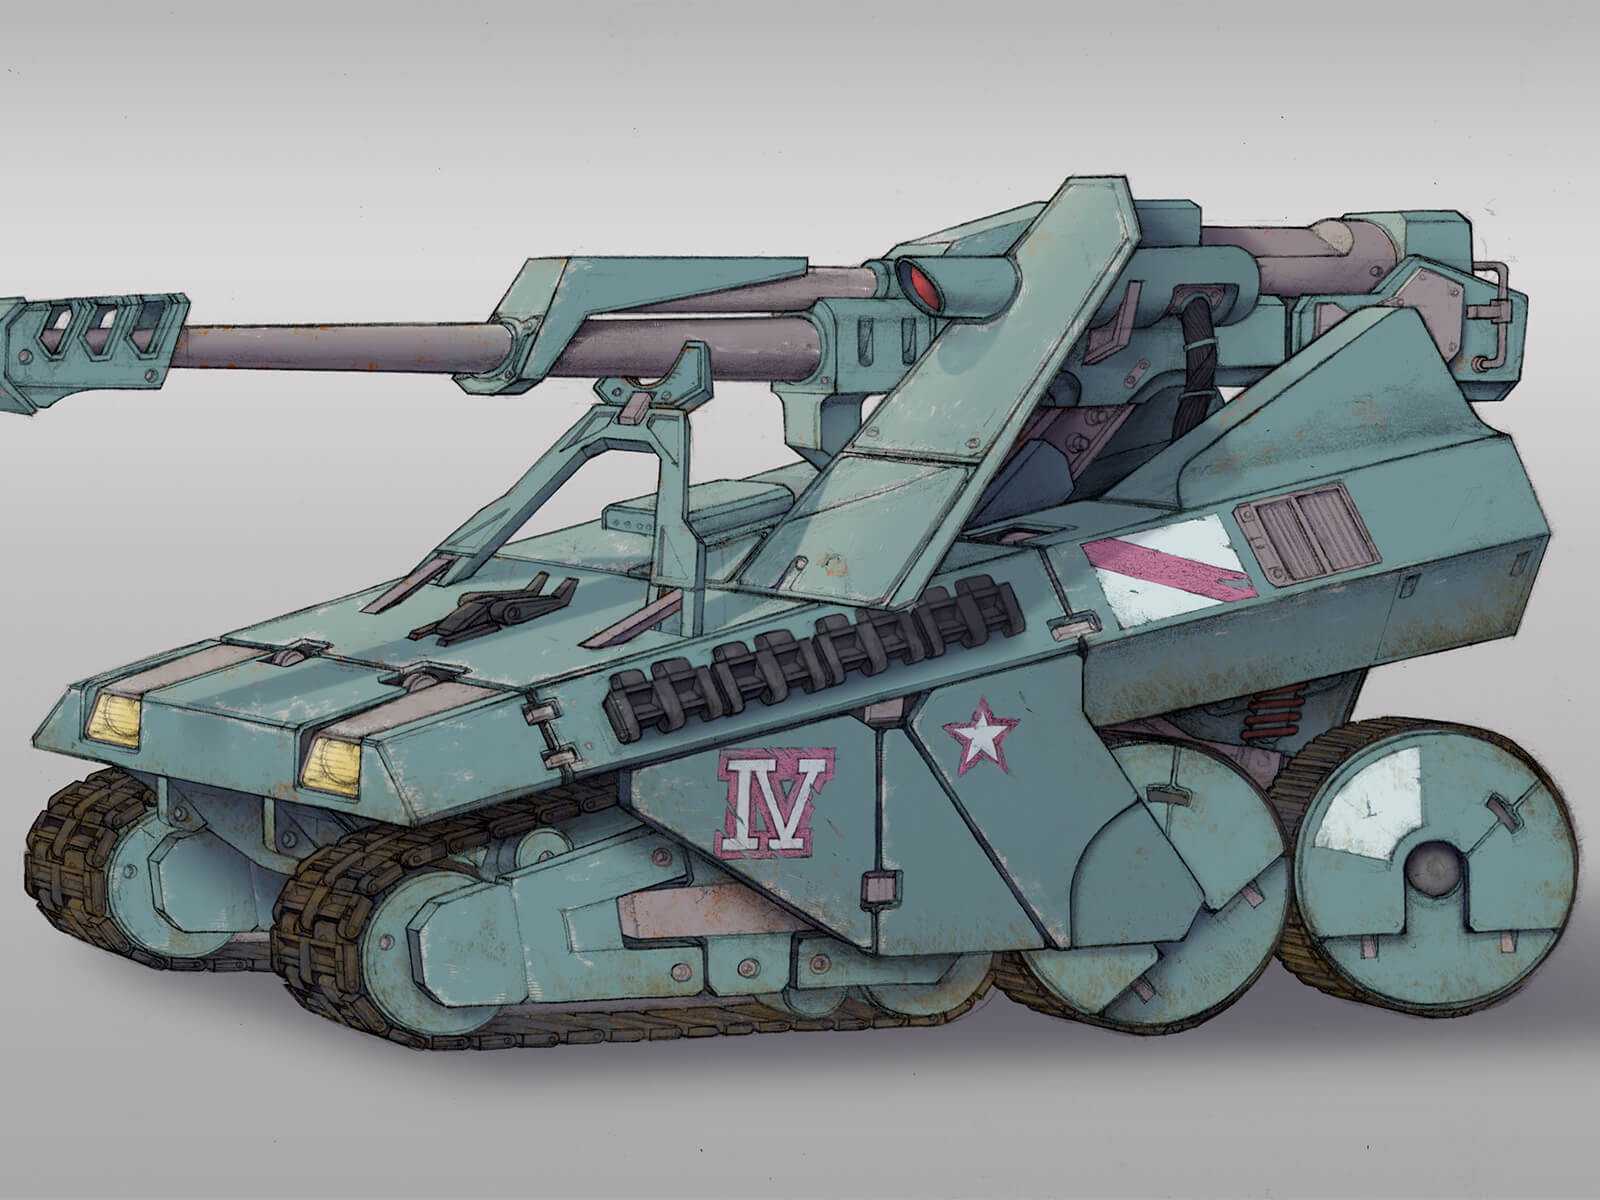 A sturdy military tank with a large gun and IV printed on the side